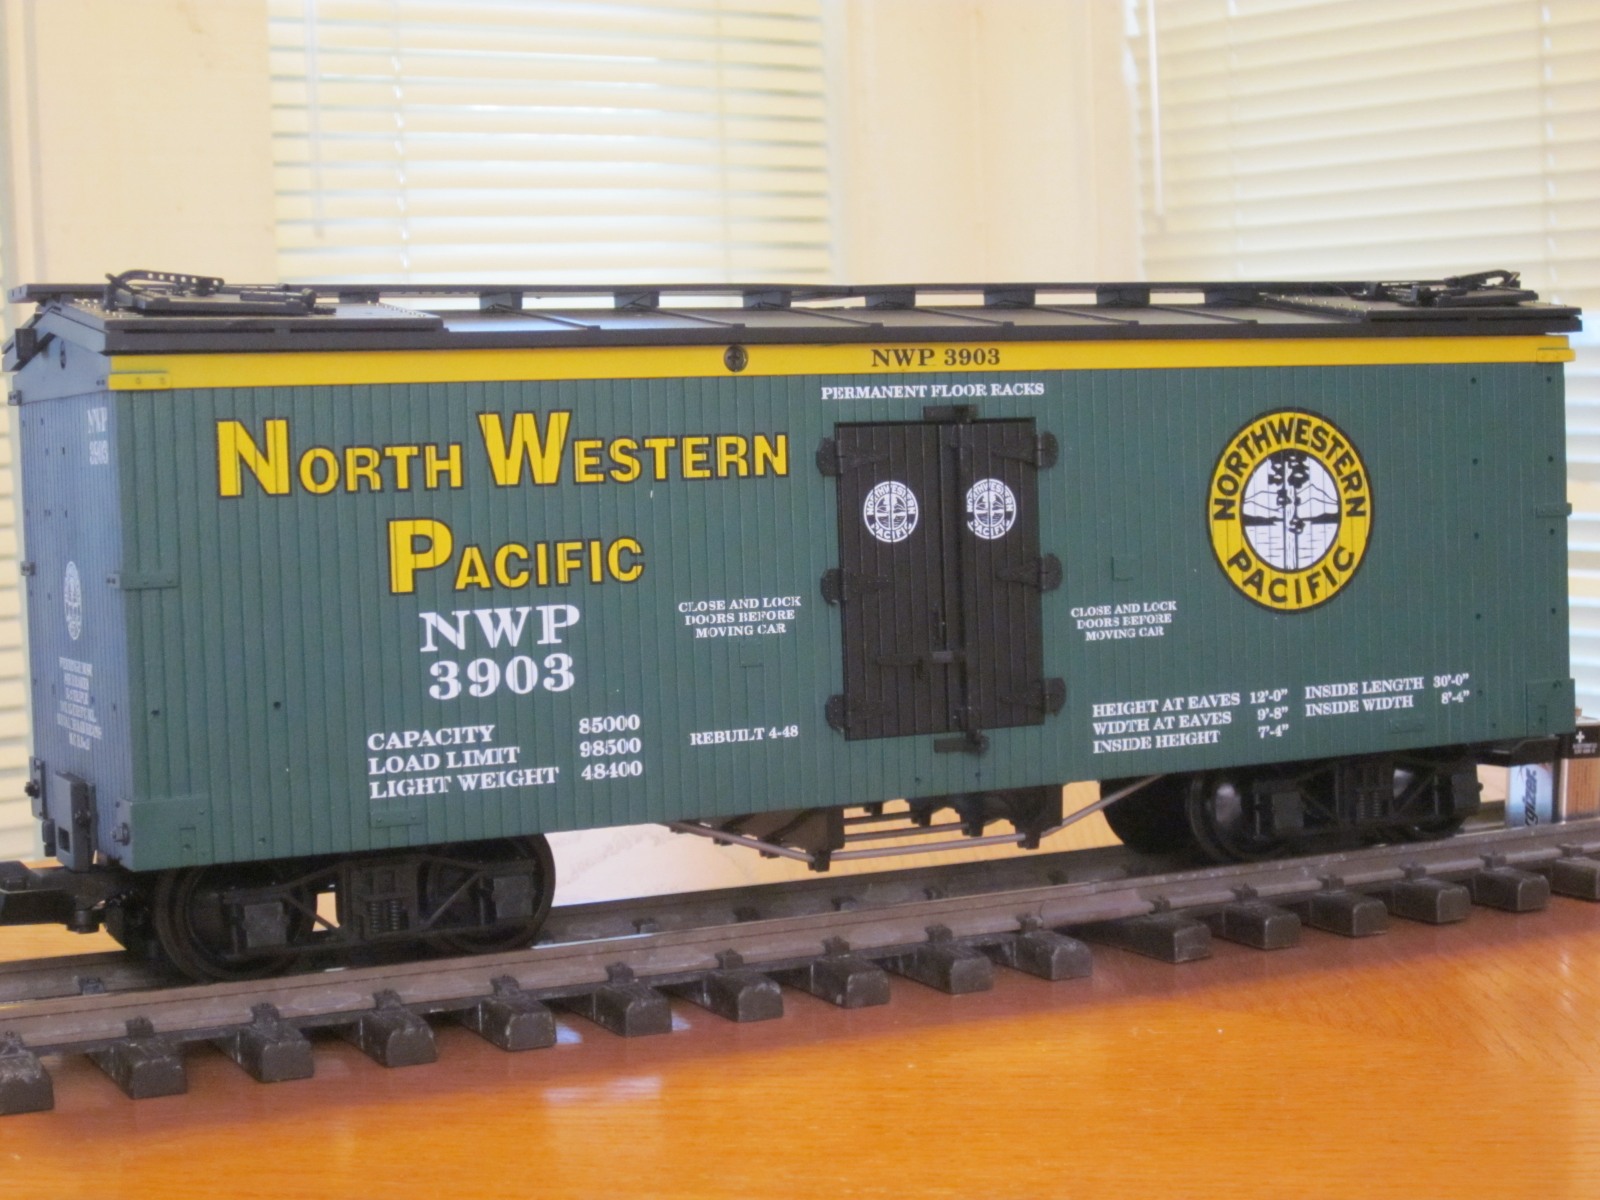 R16157 North Western Pacific NWP 3903